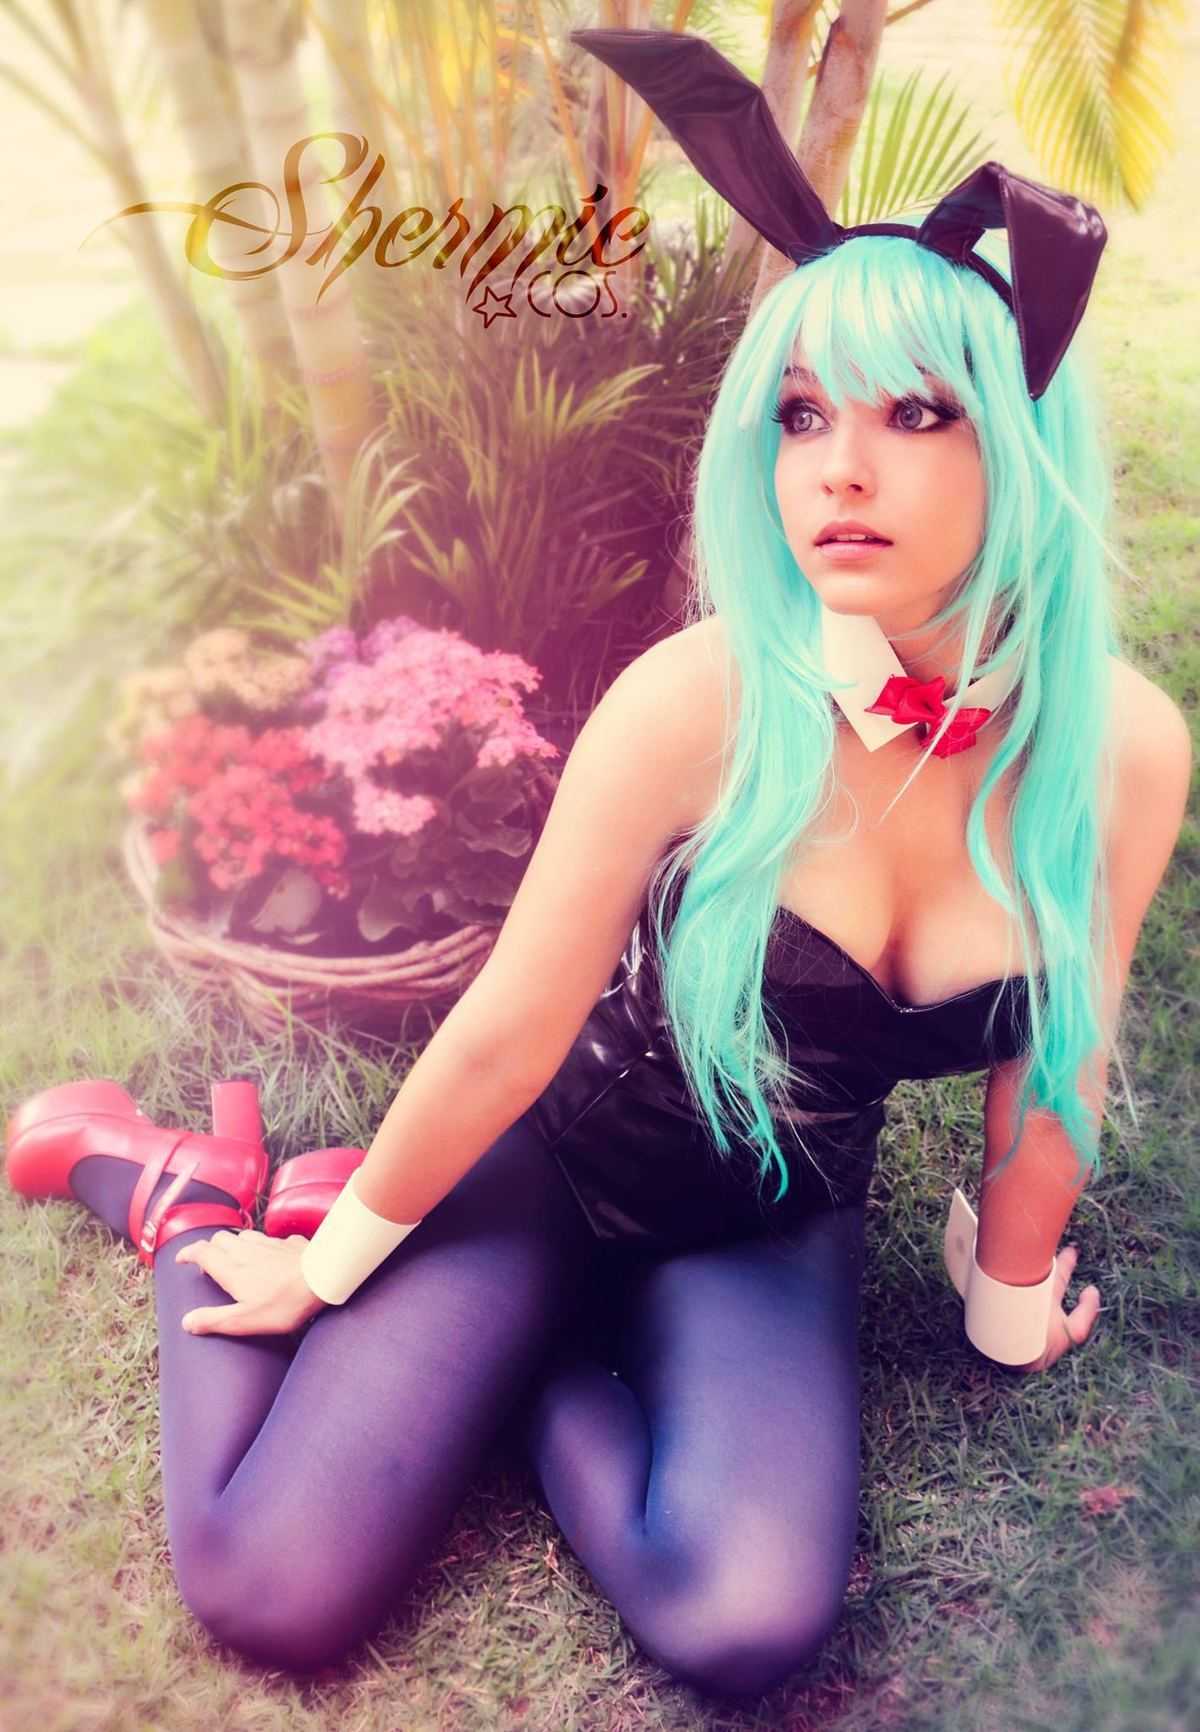 70+ Hot Pictures Of Bulma From Dragon Ball Z Are Sure To Get Your Heart Thumping Fast 5